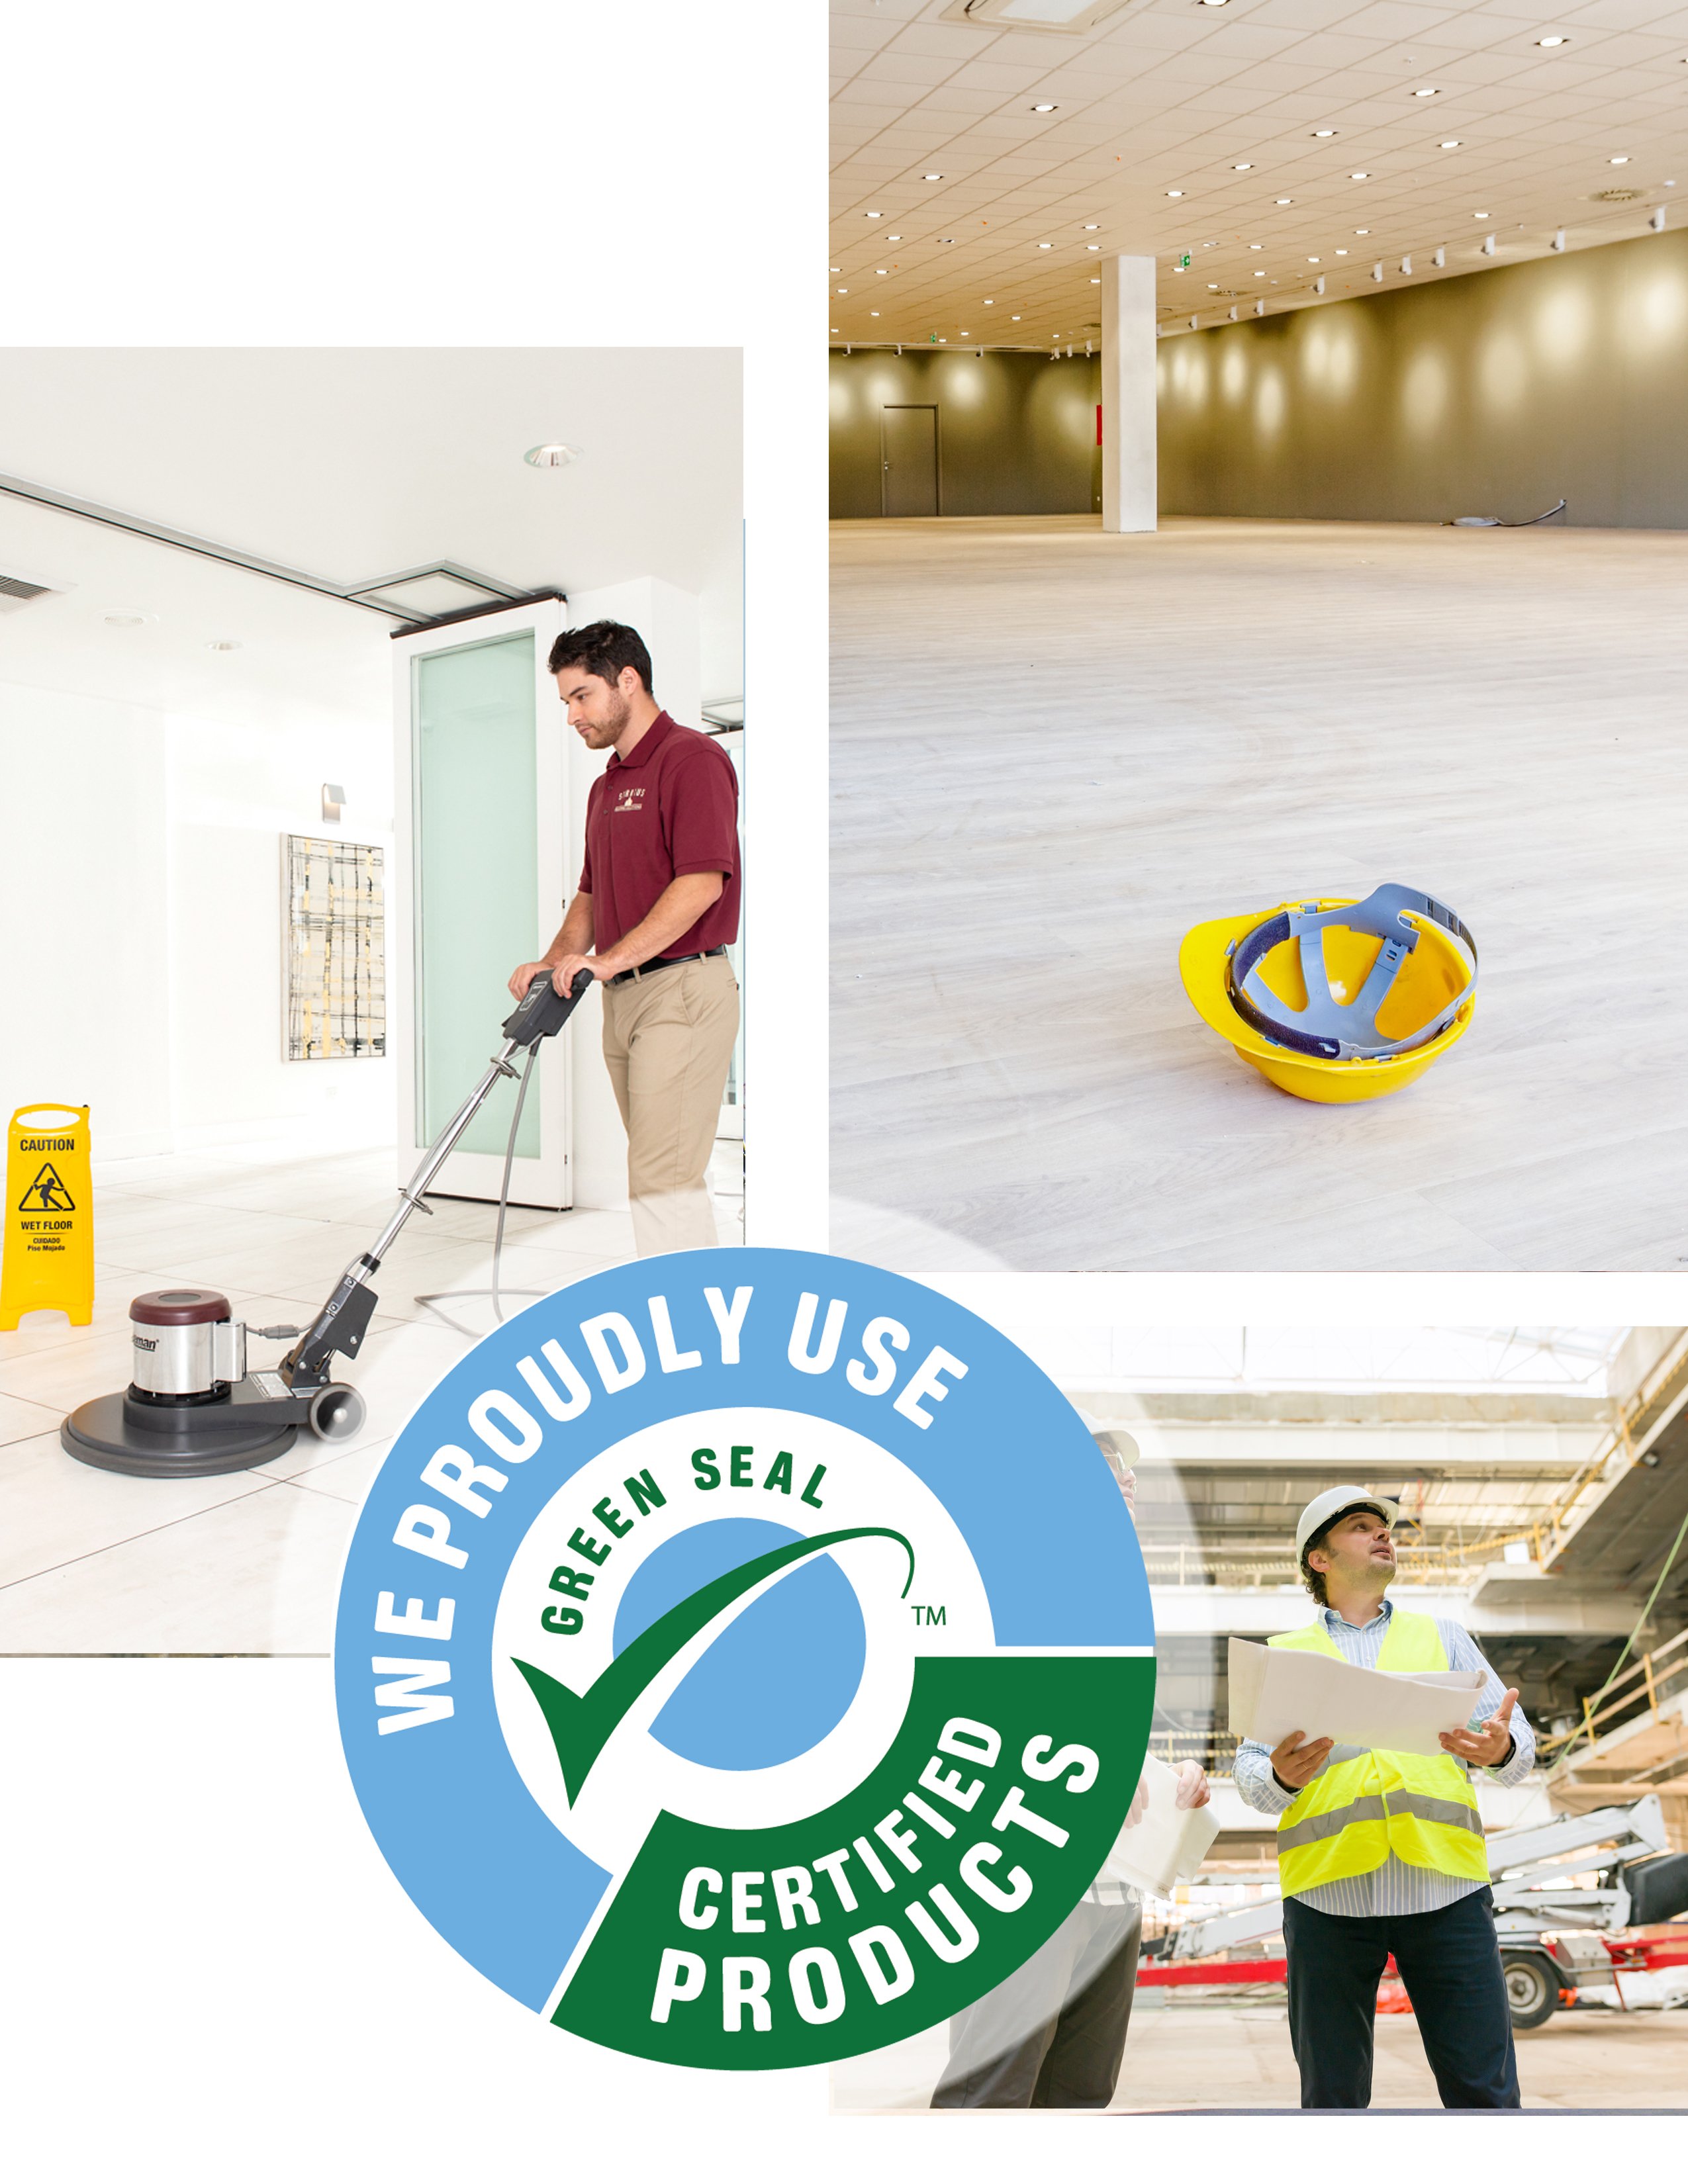 Commercial Disinfectant Cleaning Las Vegas